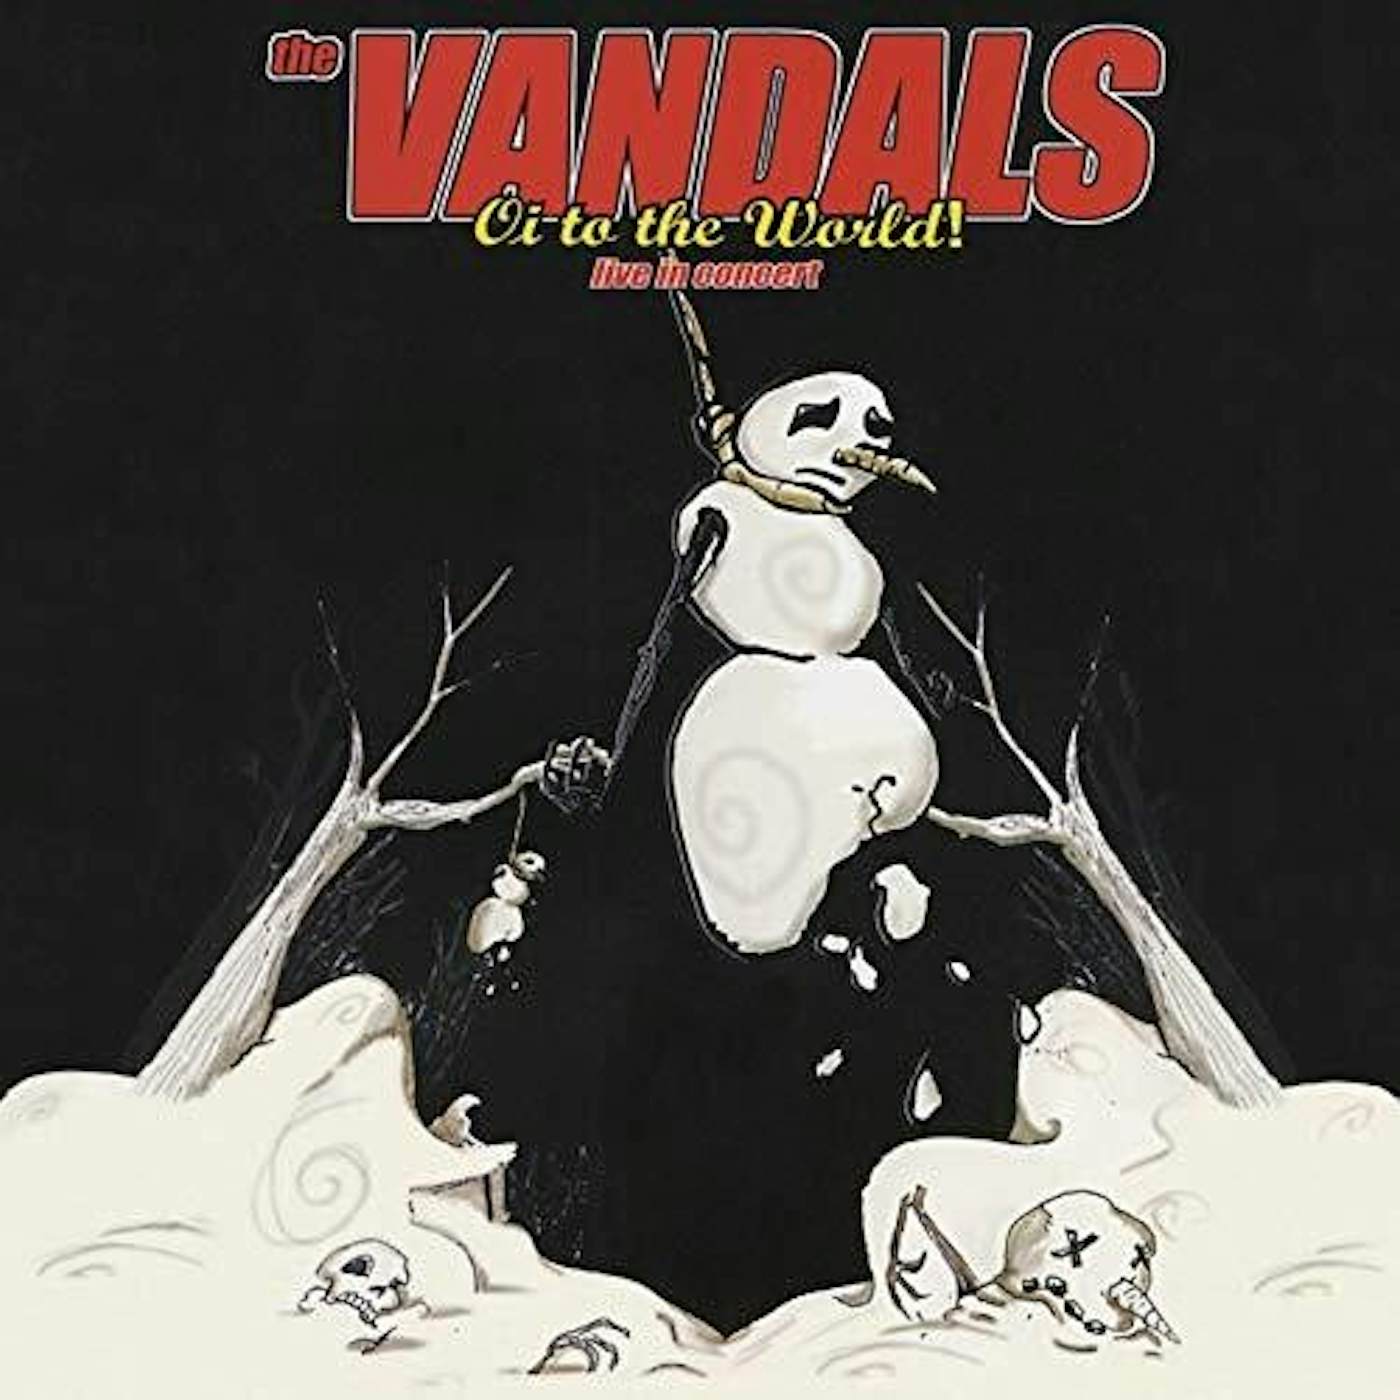 The Vandals  OI TO THE WORLD LIVE IN CONCERT CD